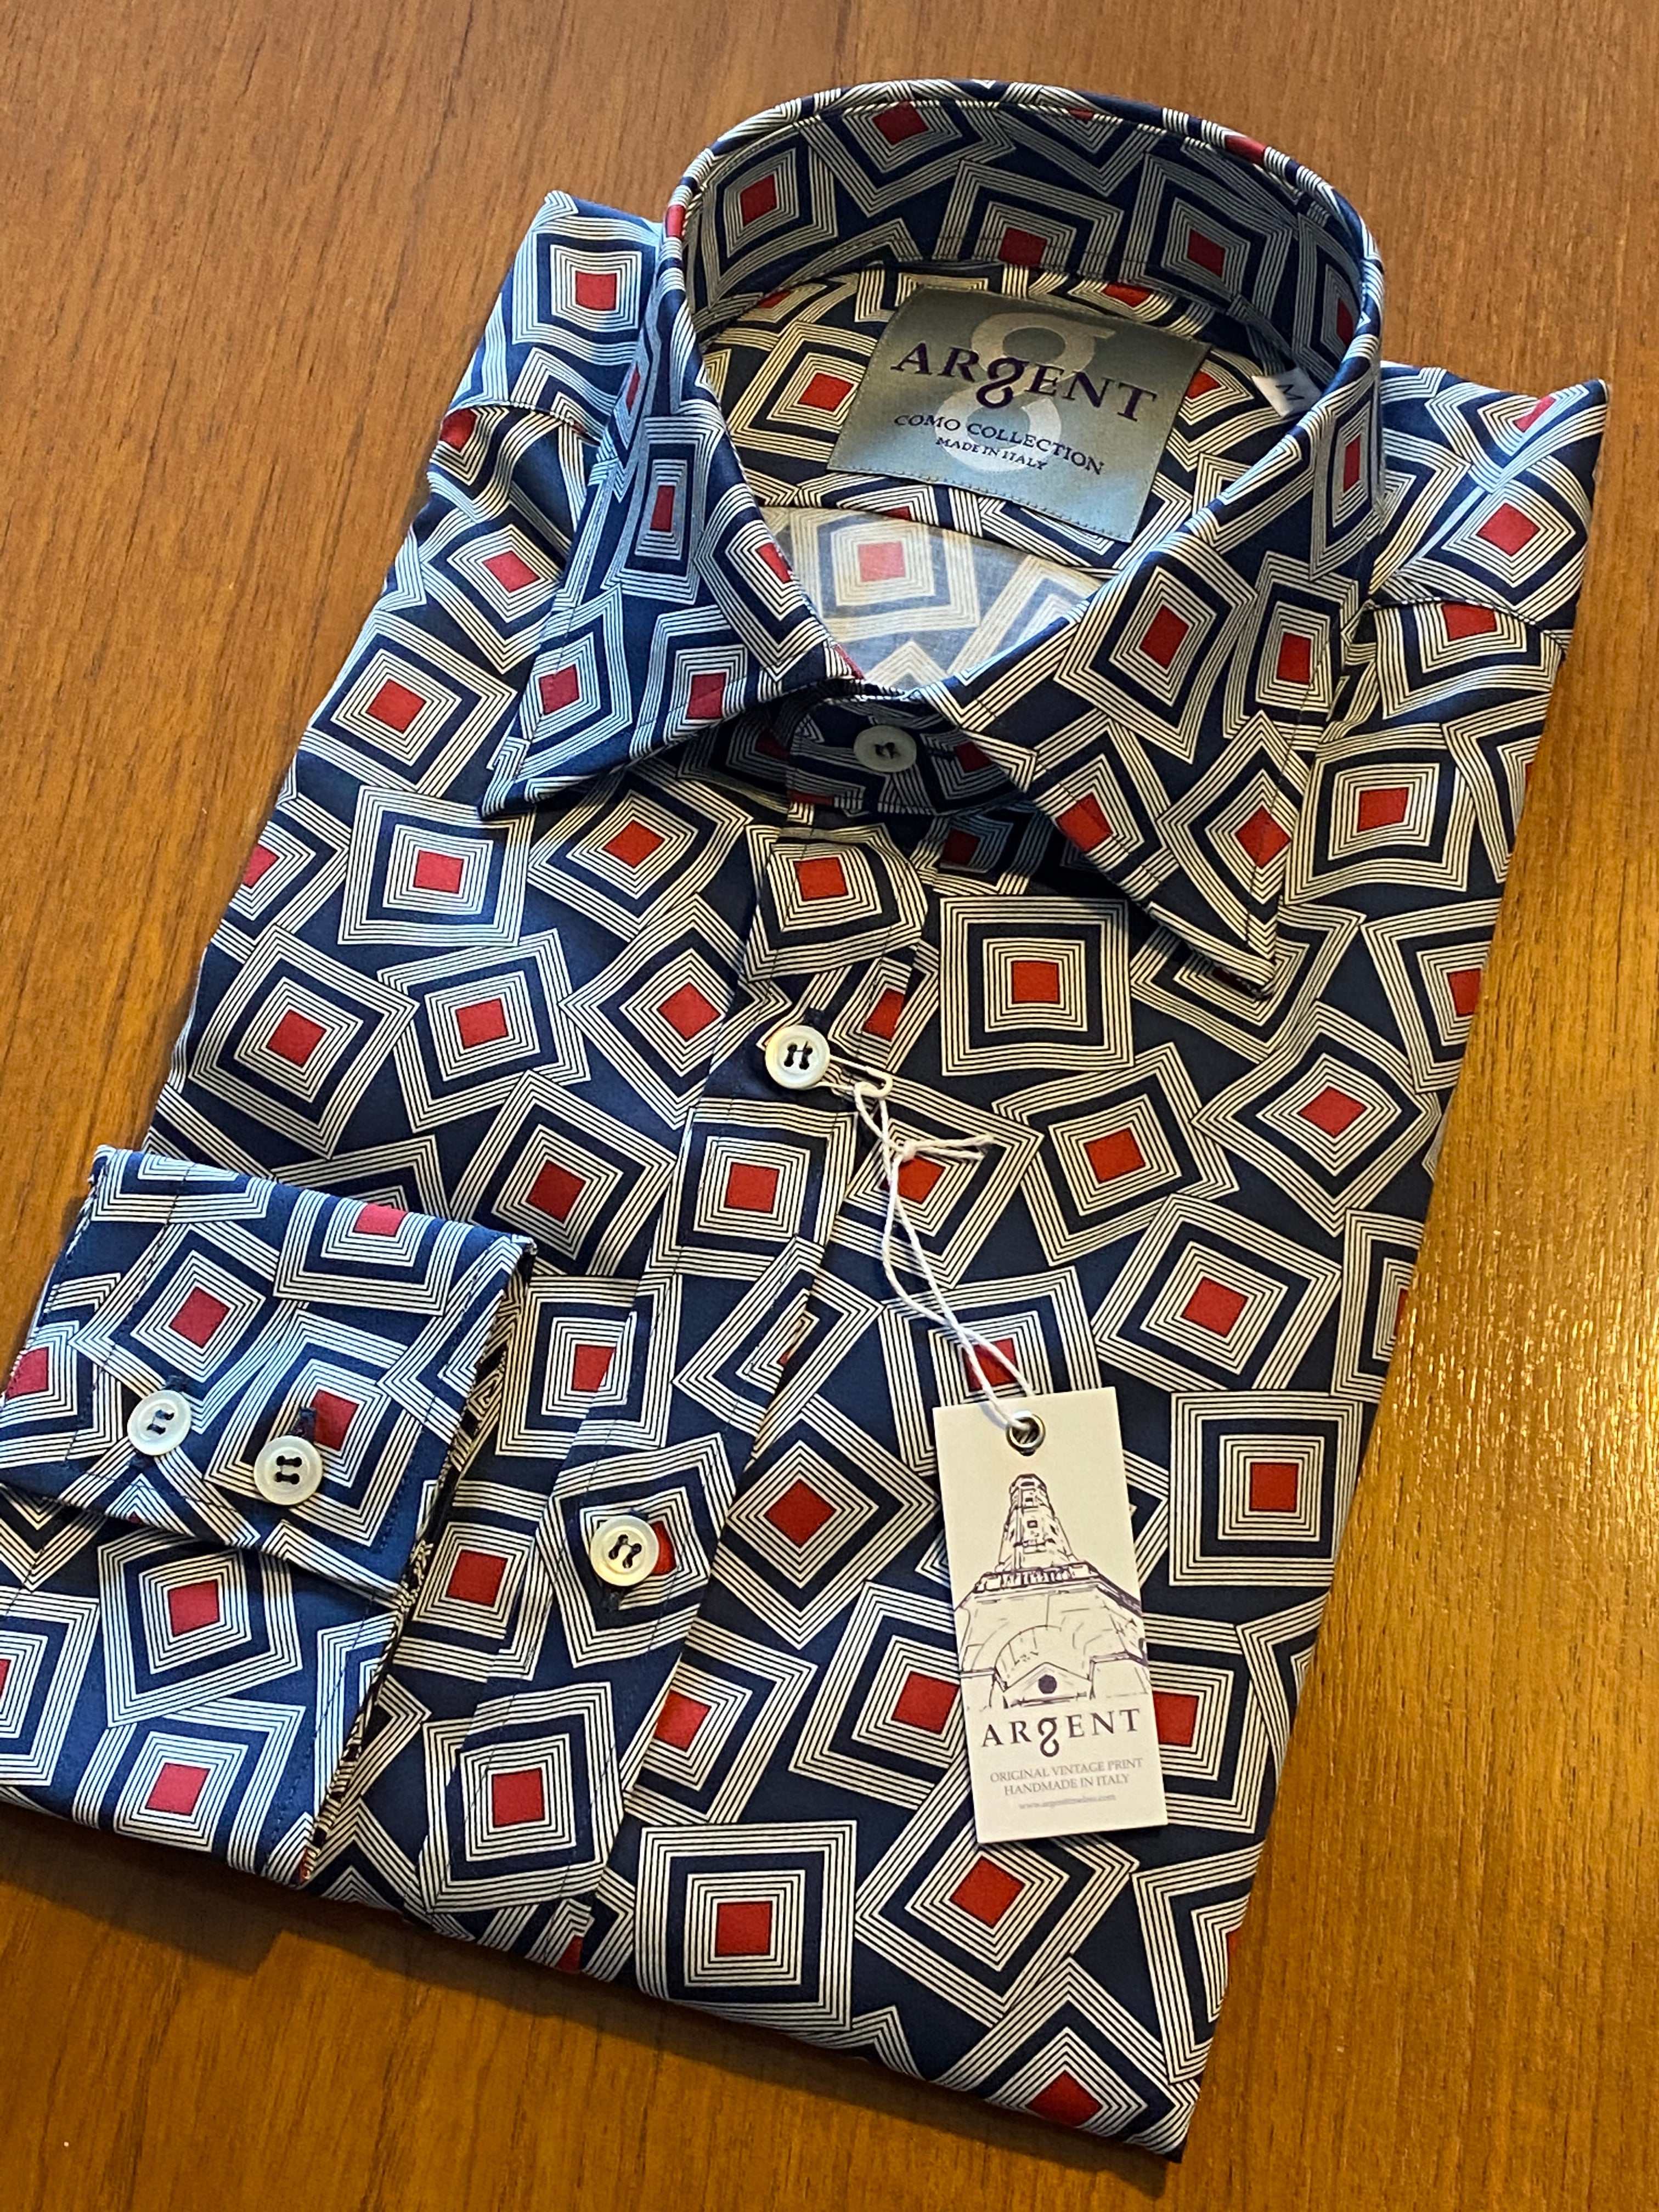 vintage shirt made in itary